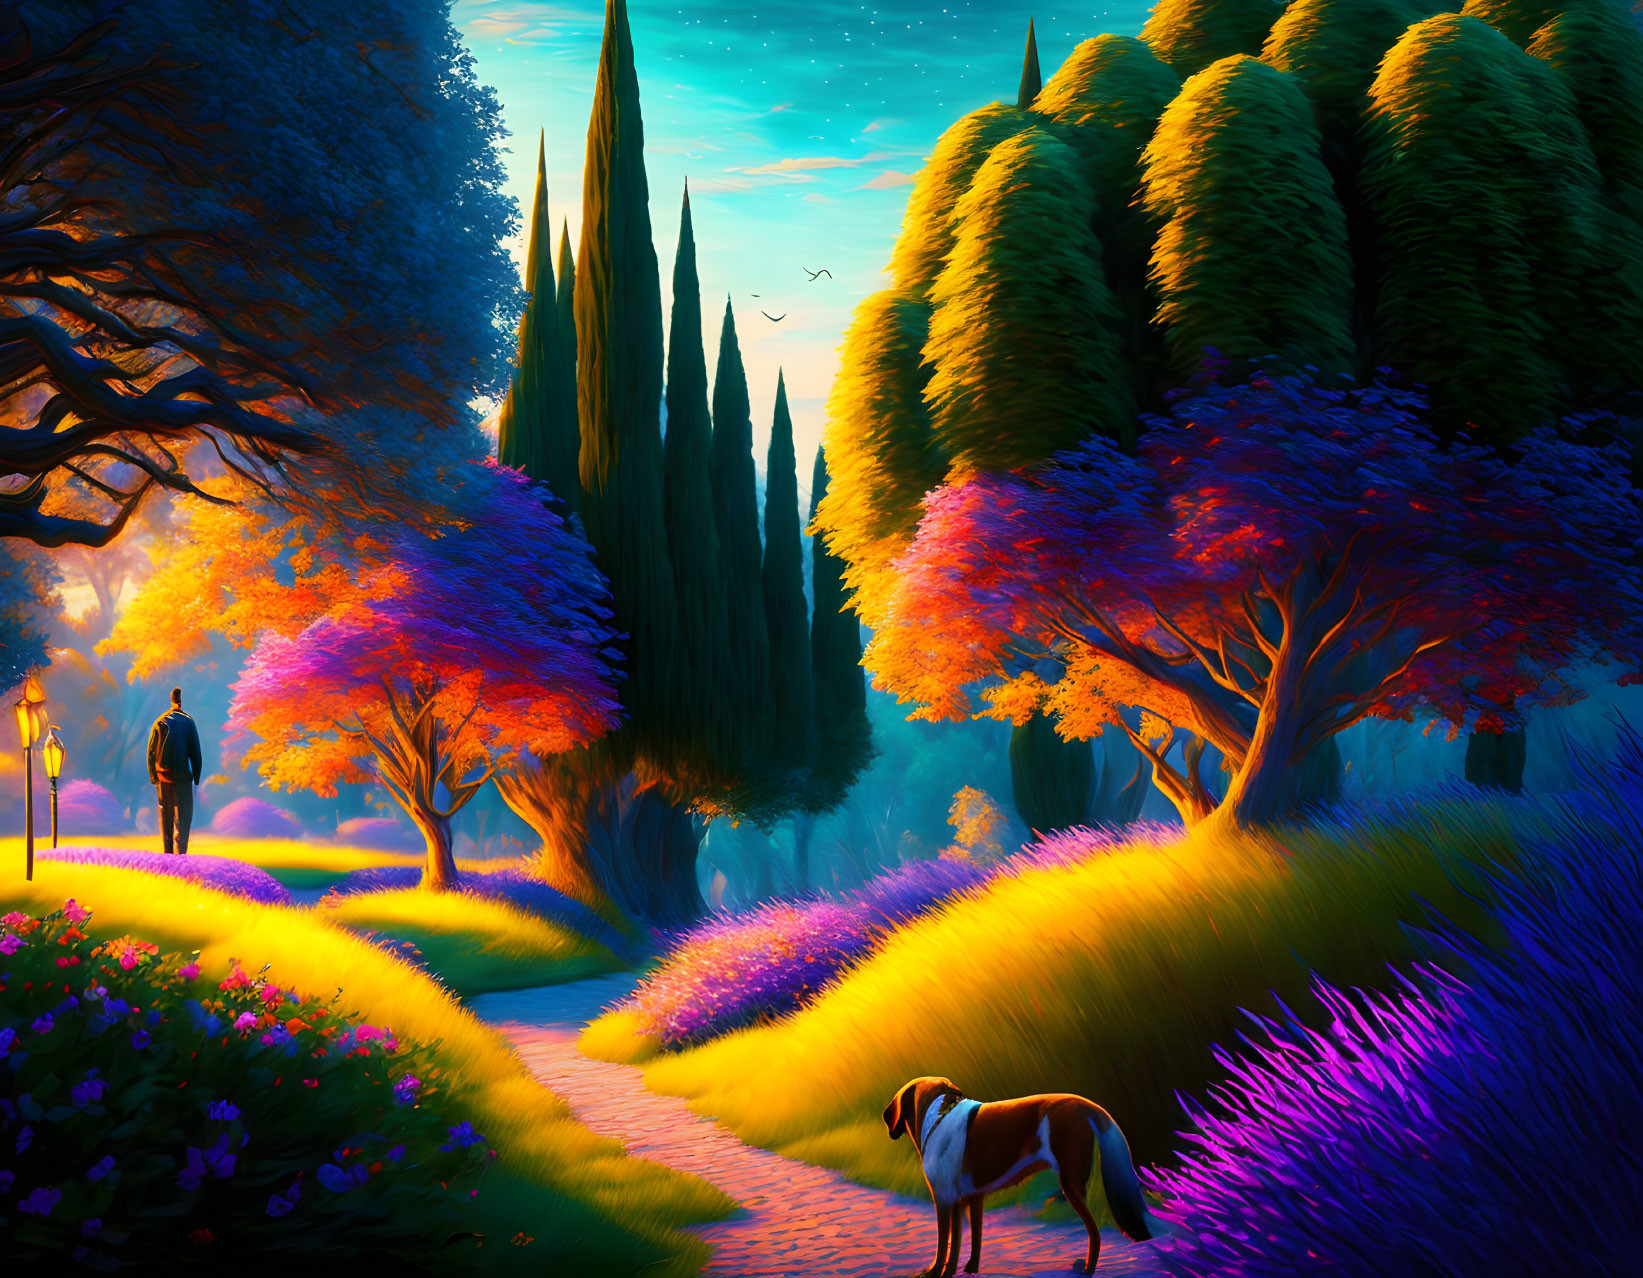 Colorful Landscape with Silhouetted Figures, Dog, Trees, and Sunset Sky